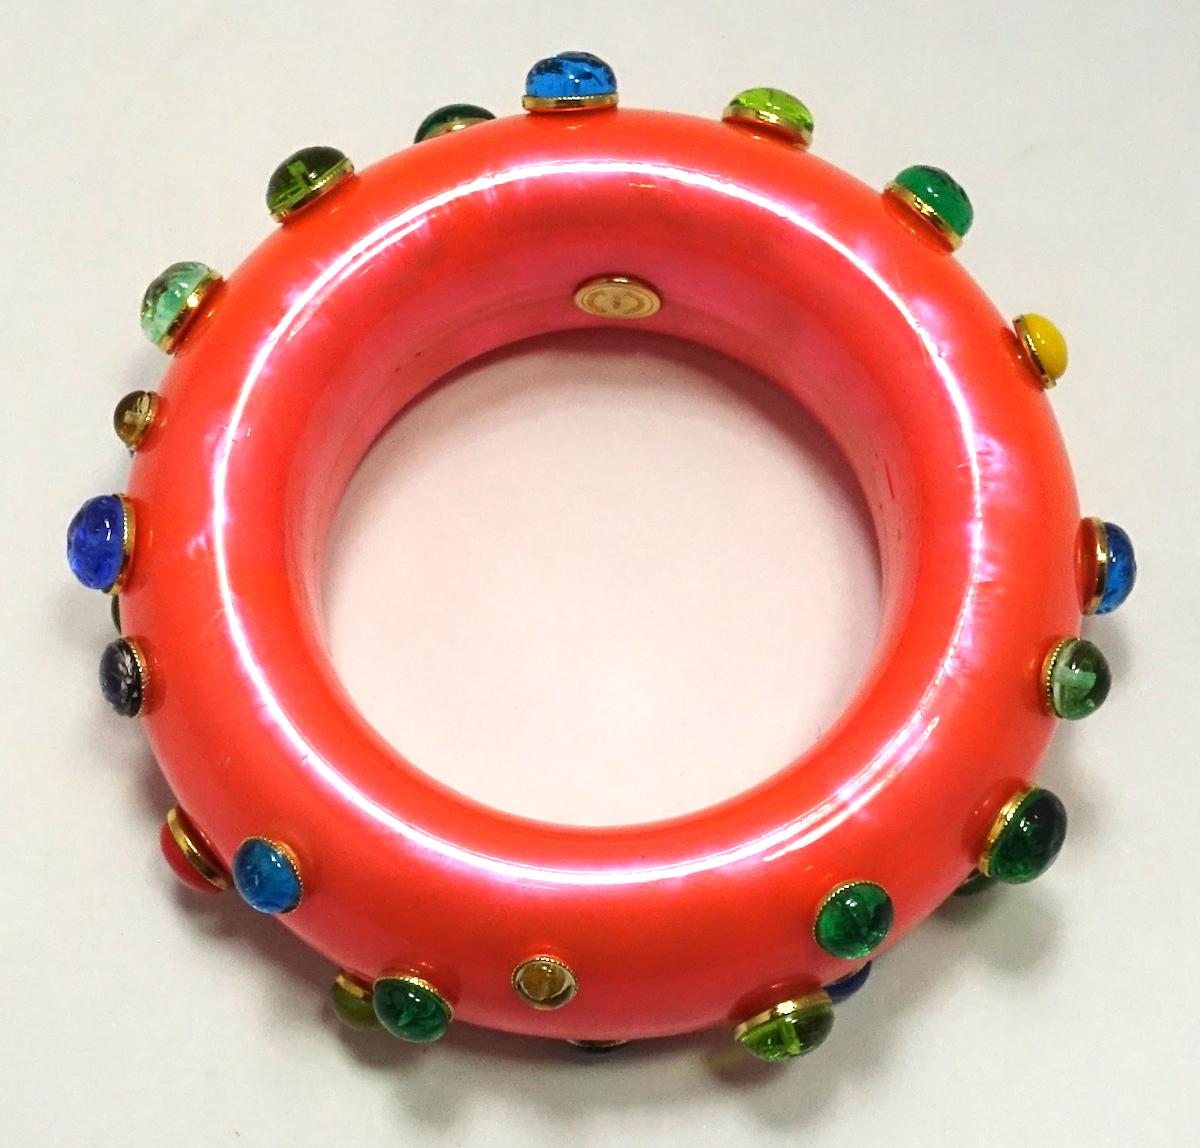 This vintage signed Dominique Aurientis bangle bracelet features multi-color poured glass accents on a marbleized coral color resin.  This bangle measures 7-3/4” around the inside x 1-1/4” wide, is signed “Dominique Aurientis Paris” and is in